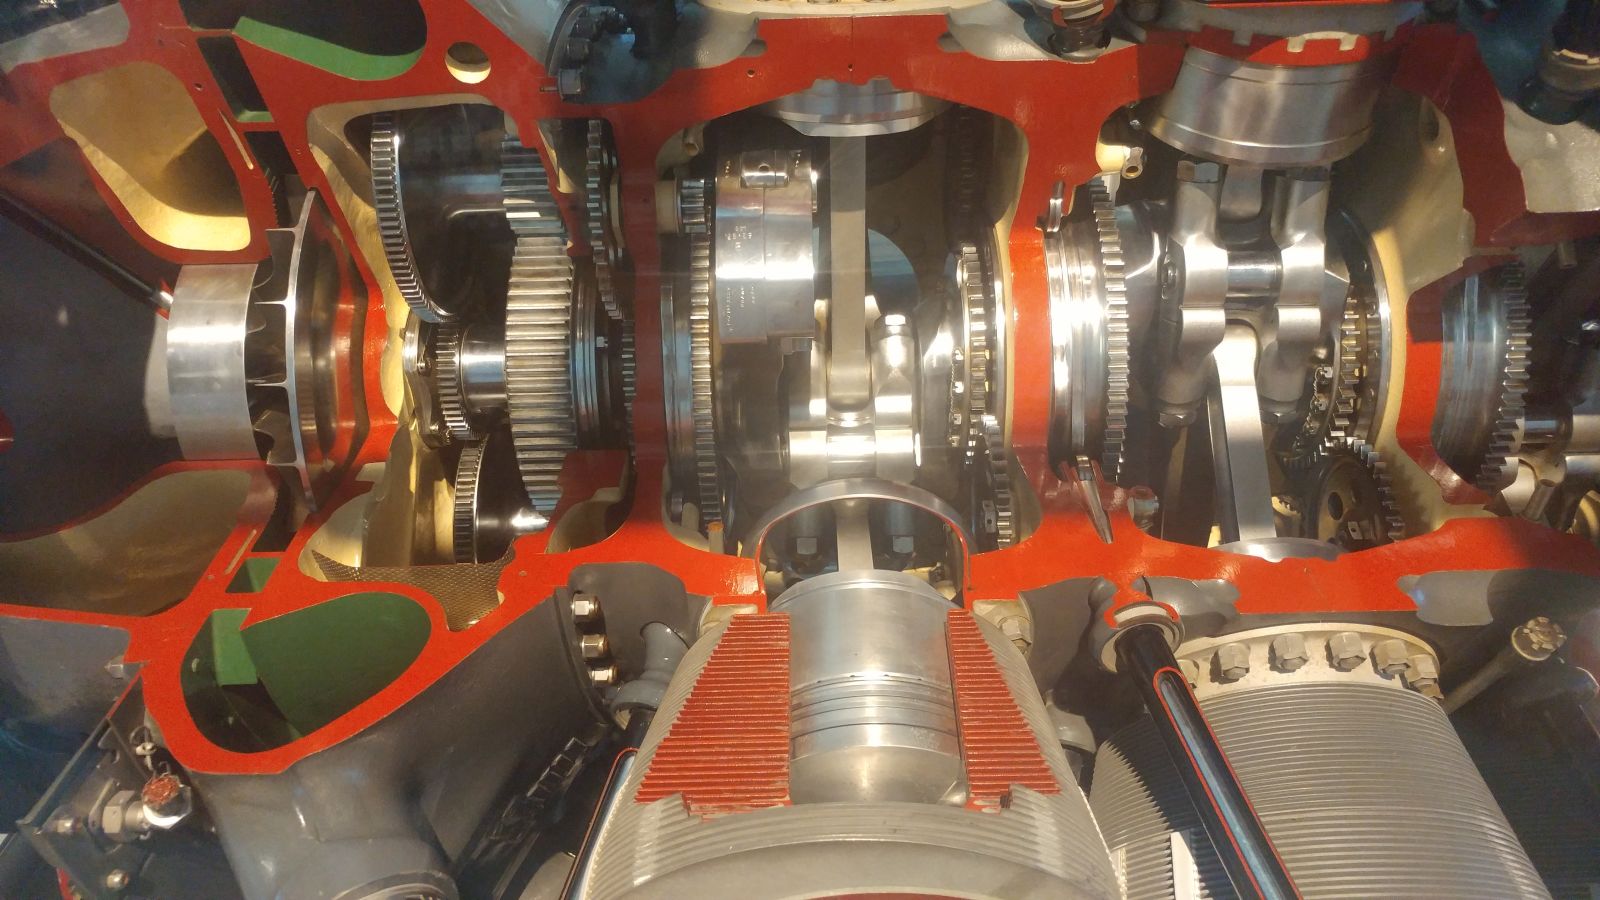 I learnt a thing: radial engines have no camshaft, they have cam rings